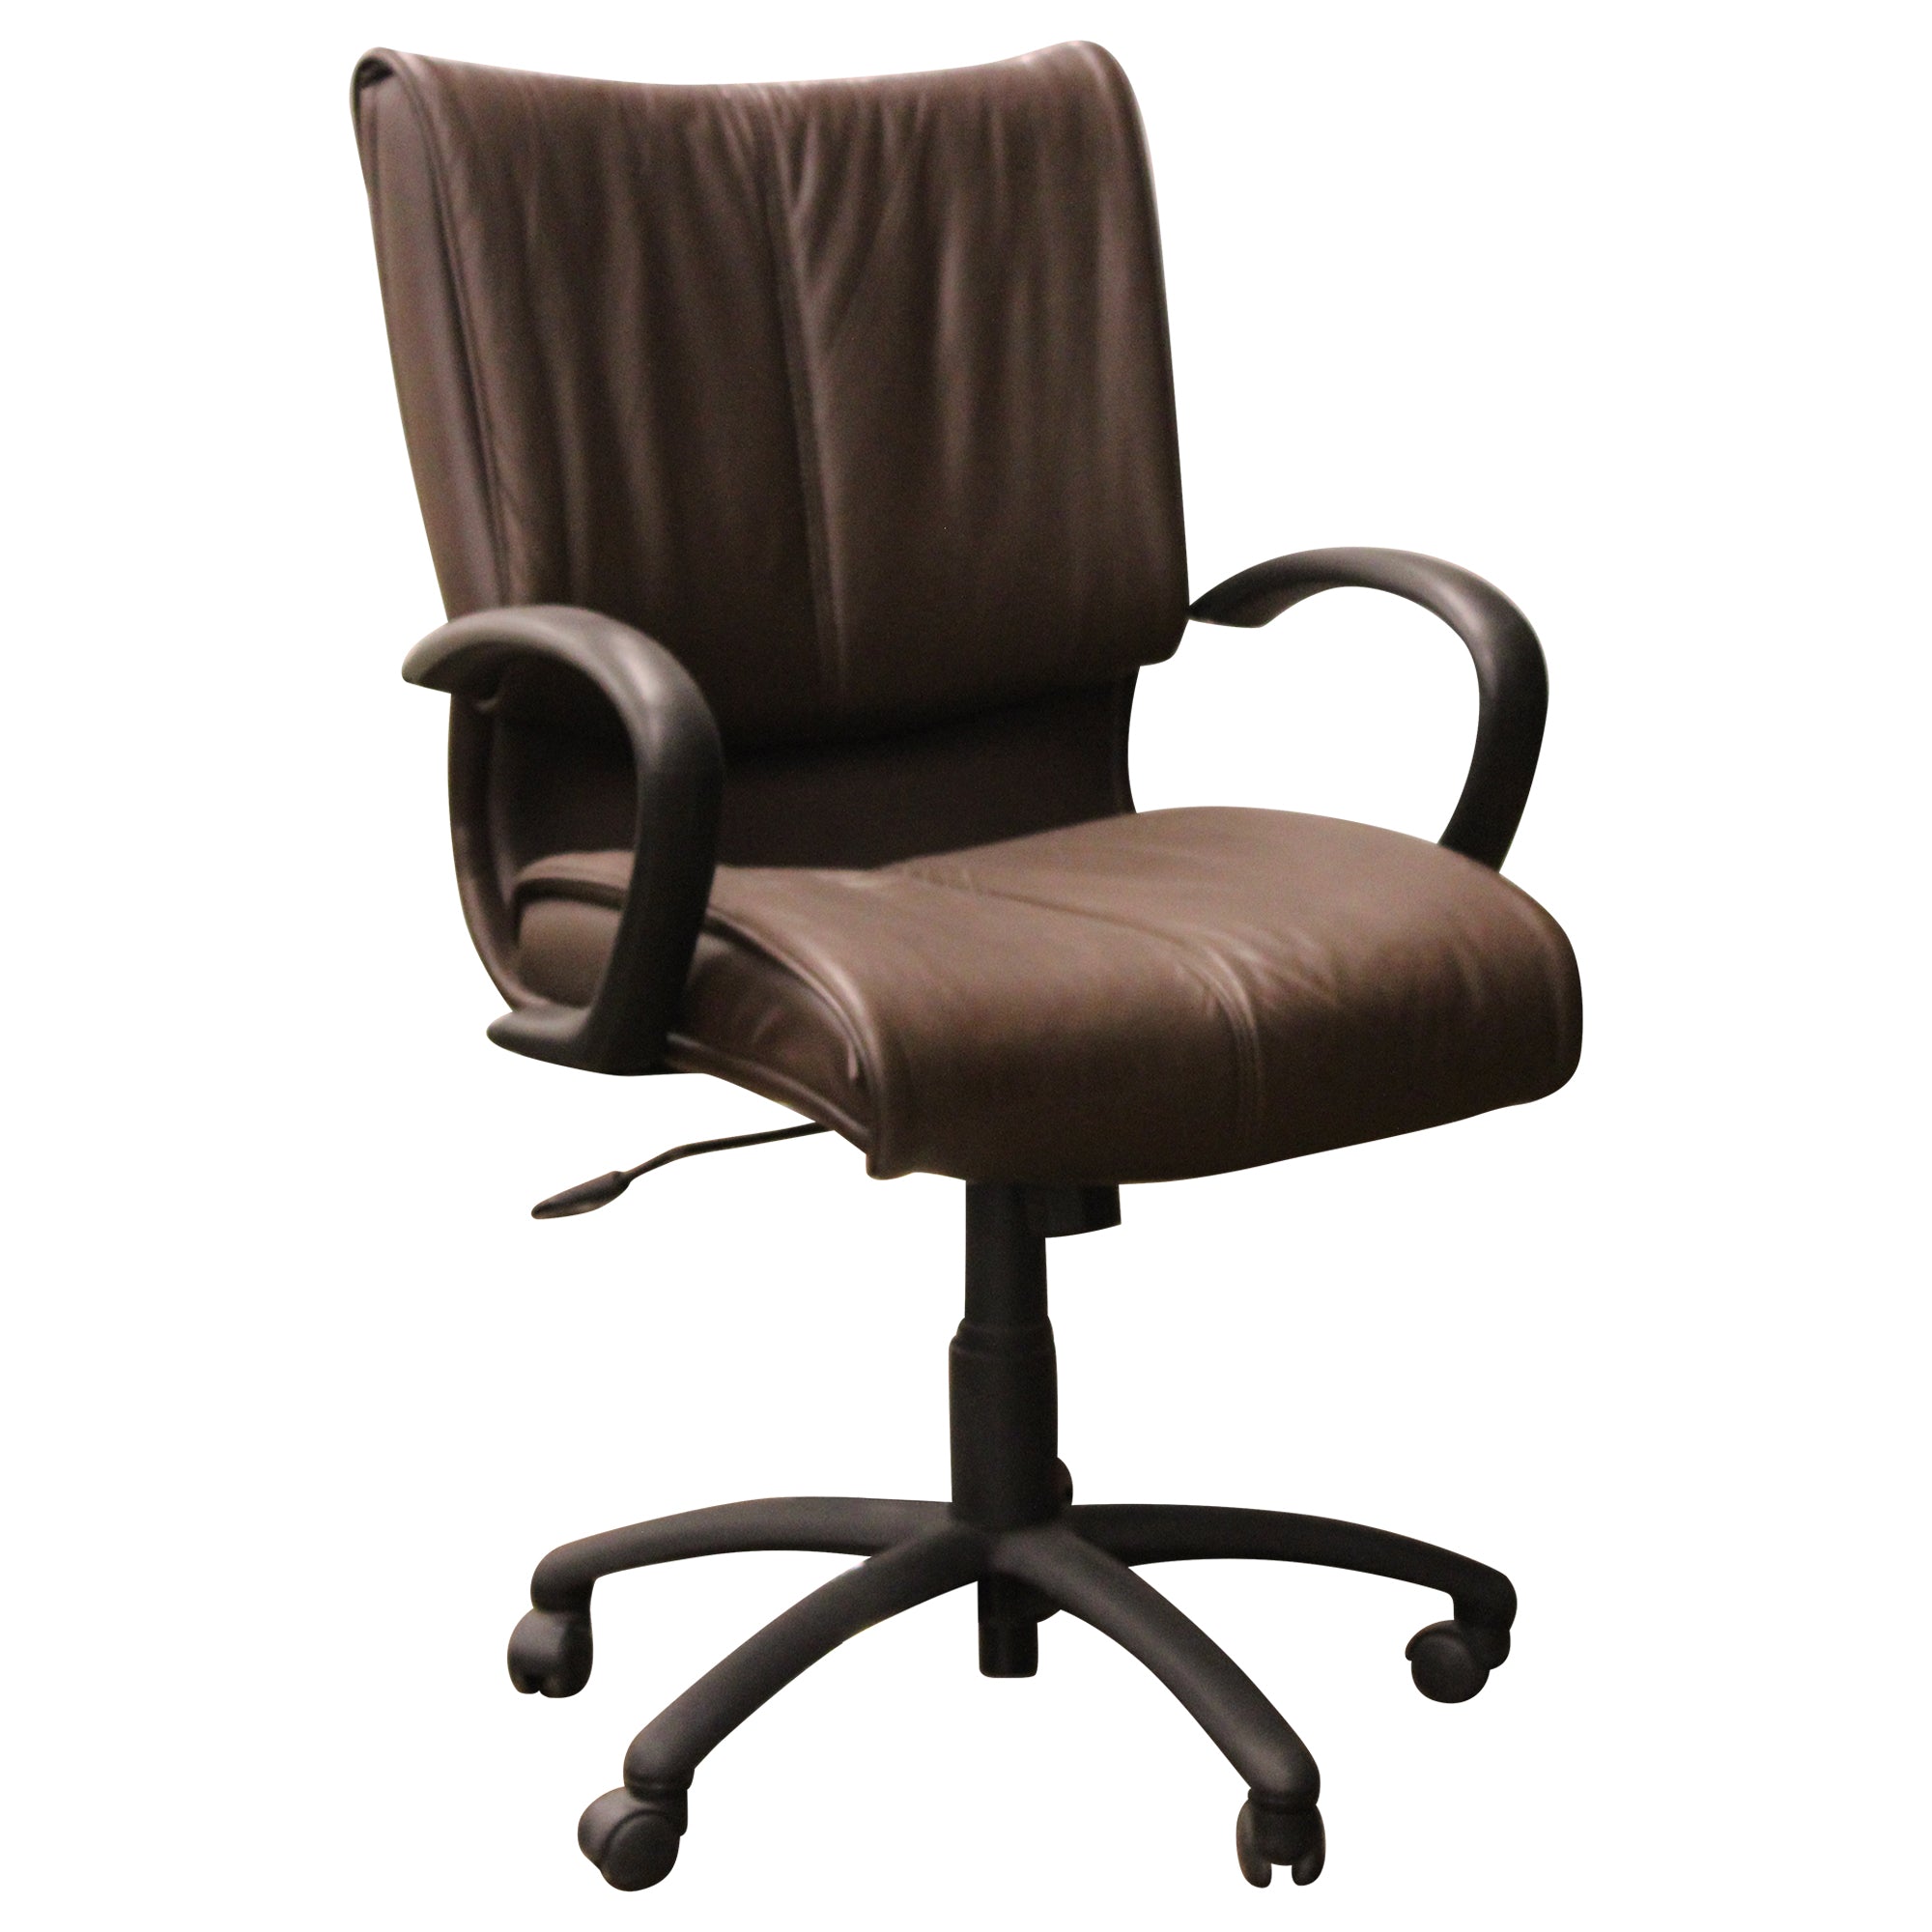 9 To 5 Seating Axis 2600 Conference Chair, Brown - Preowned